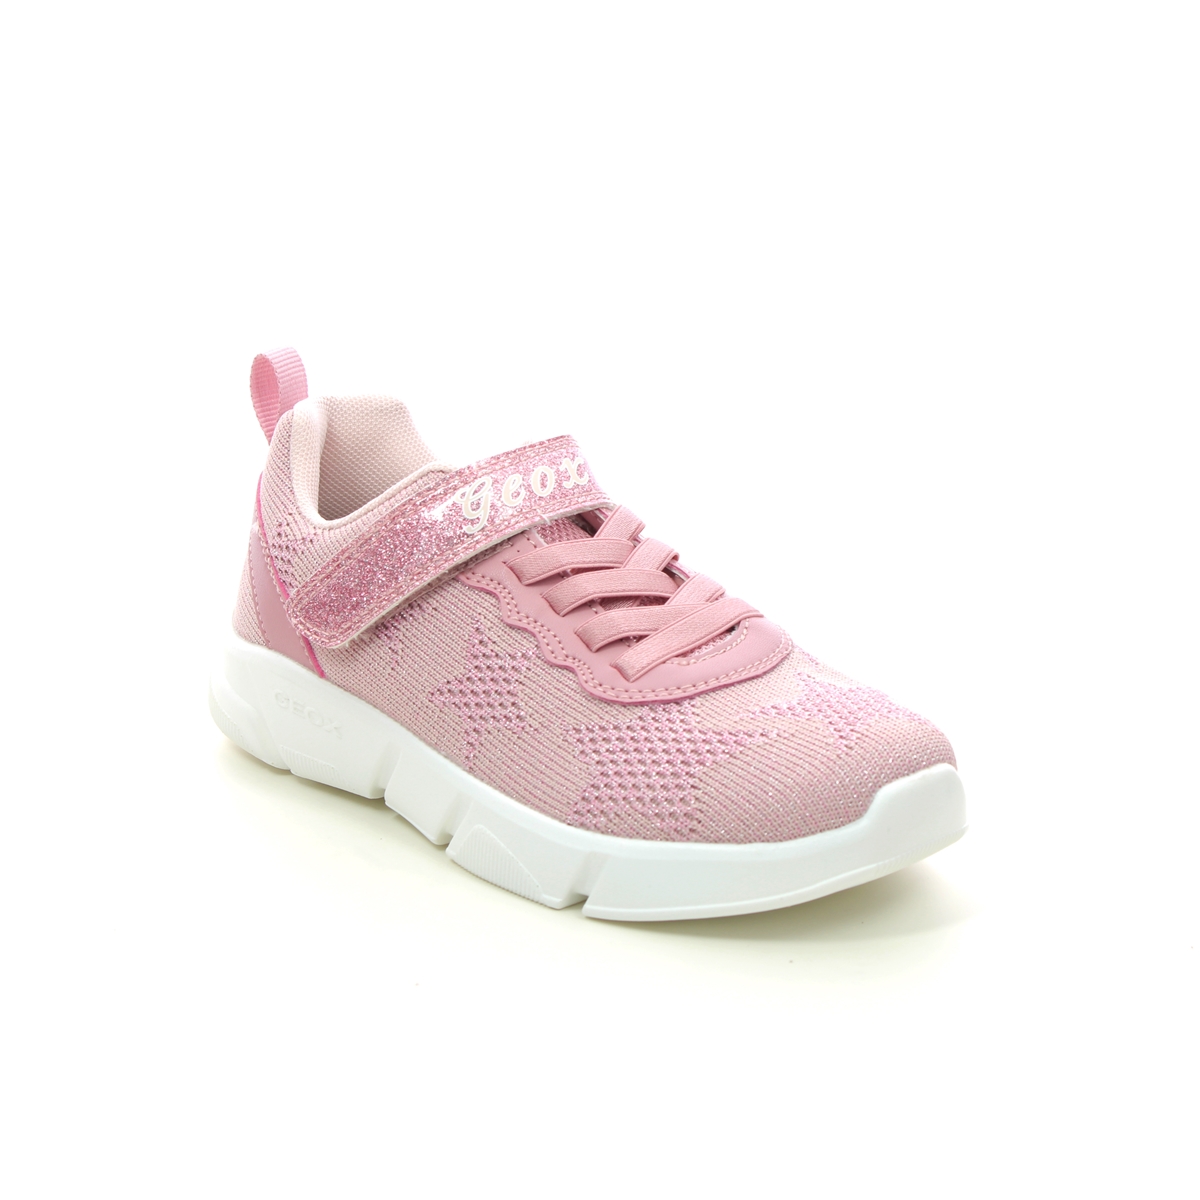 Geox Aril Girl Bu Rose pink Kids girls trainers J25DLD-C8172 in a Plain Textile in Size 31